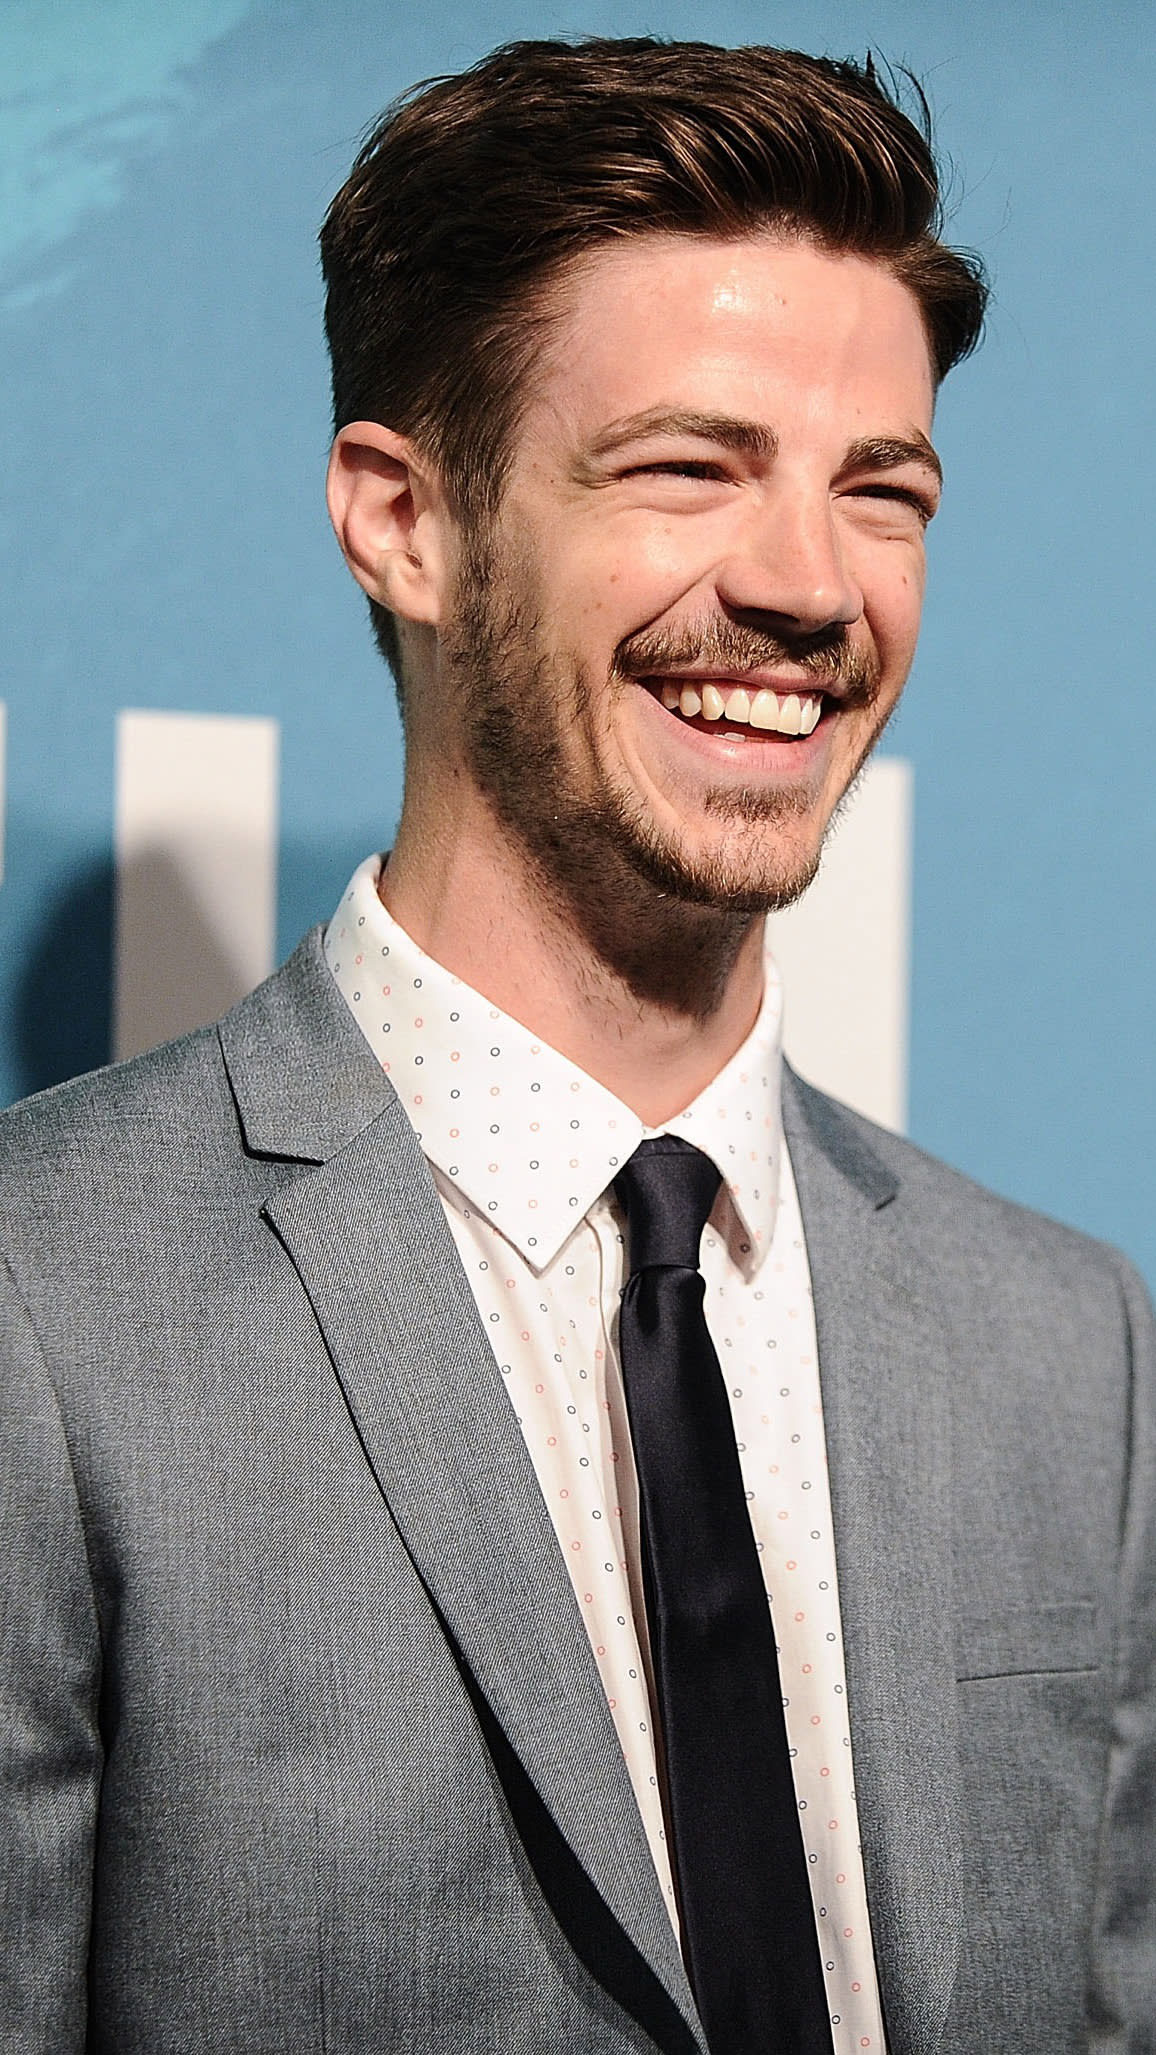 The Flash Actor Grant Gustin Responds To Body Shaming Comments On A